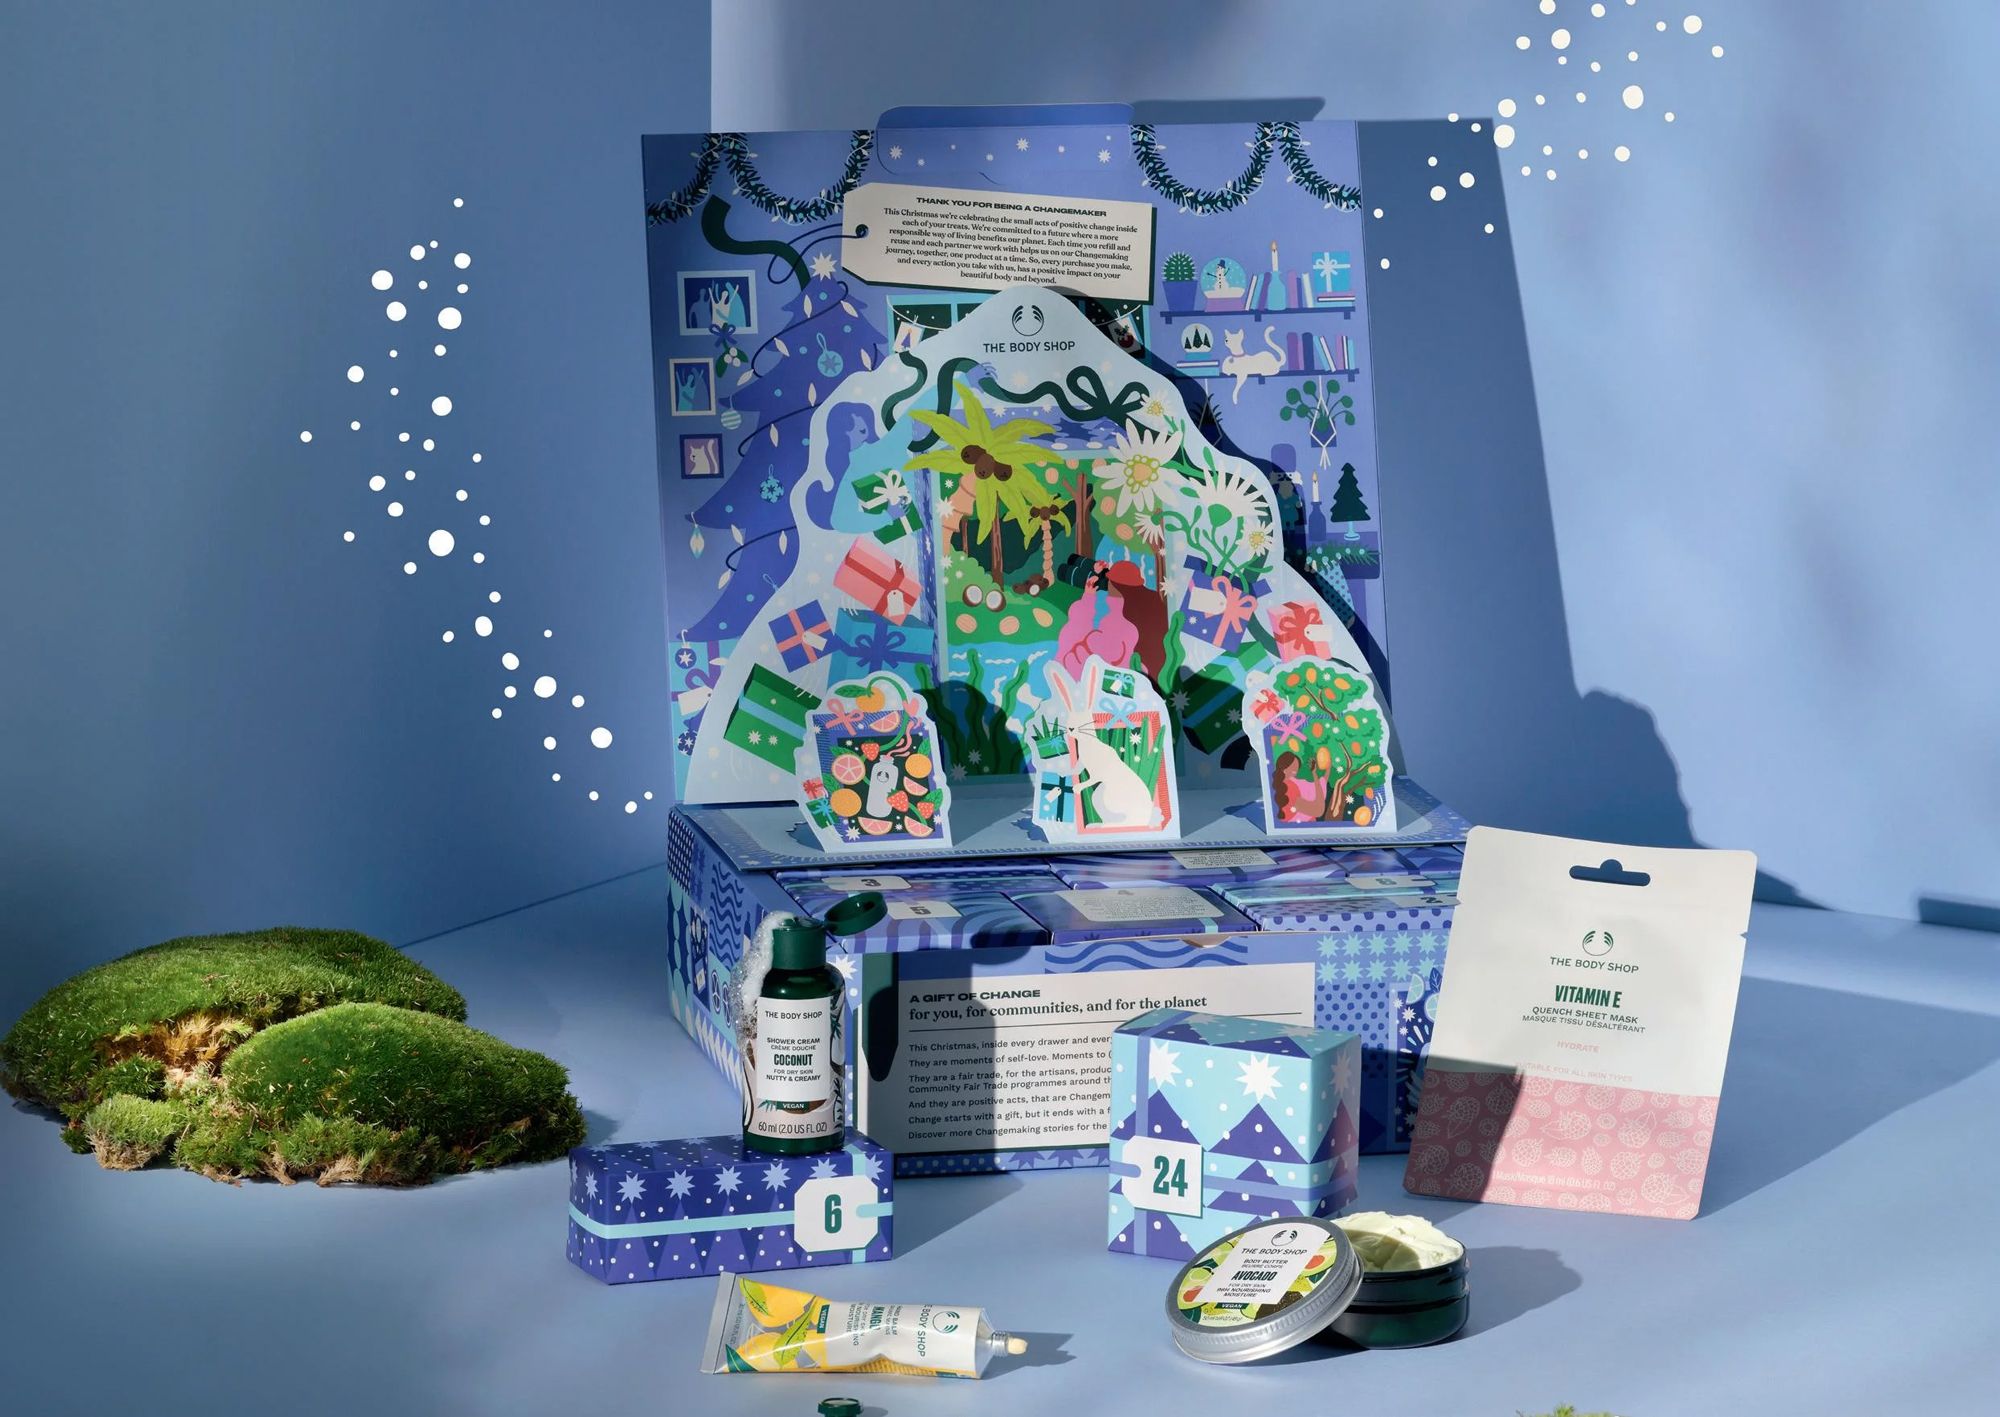 This British jeweller is selling an advent calendar for £20,000